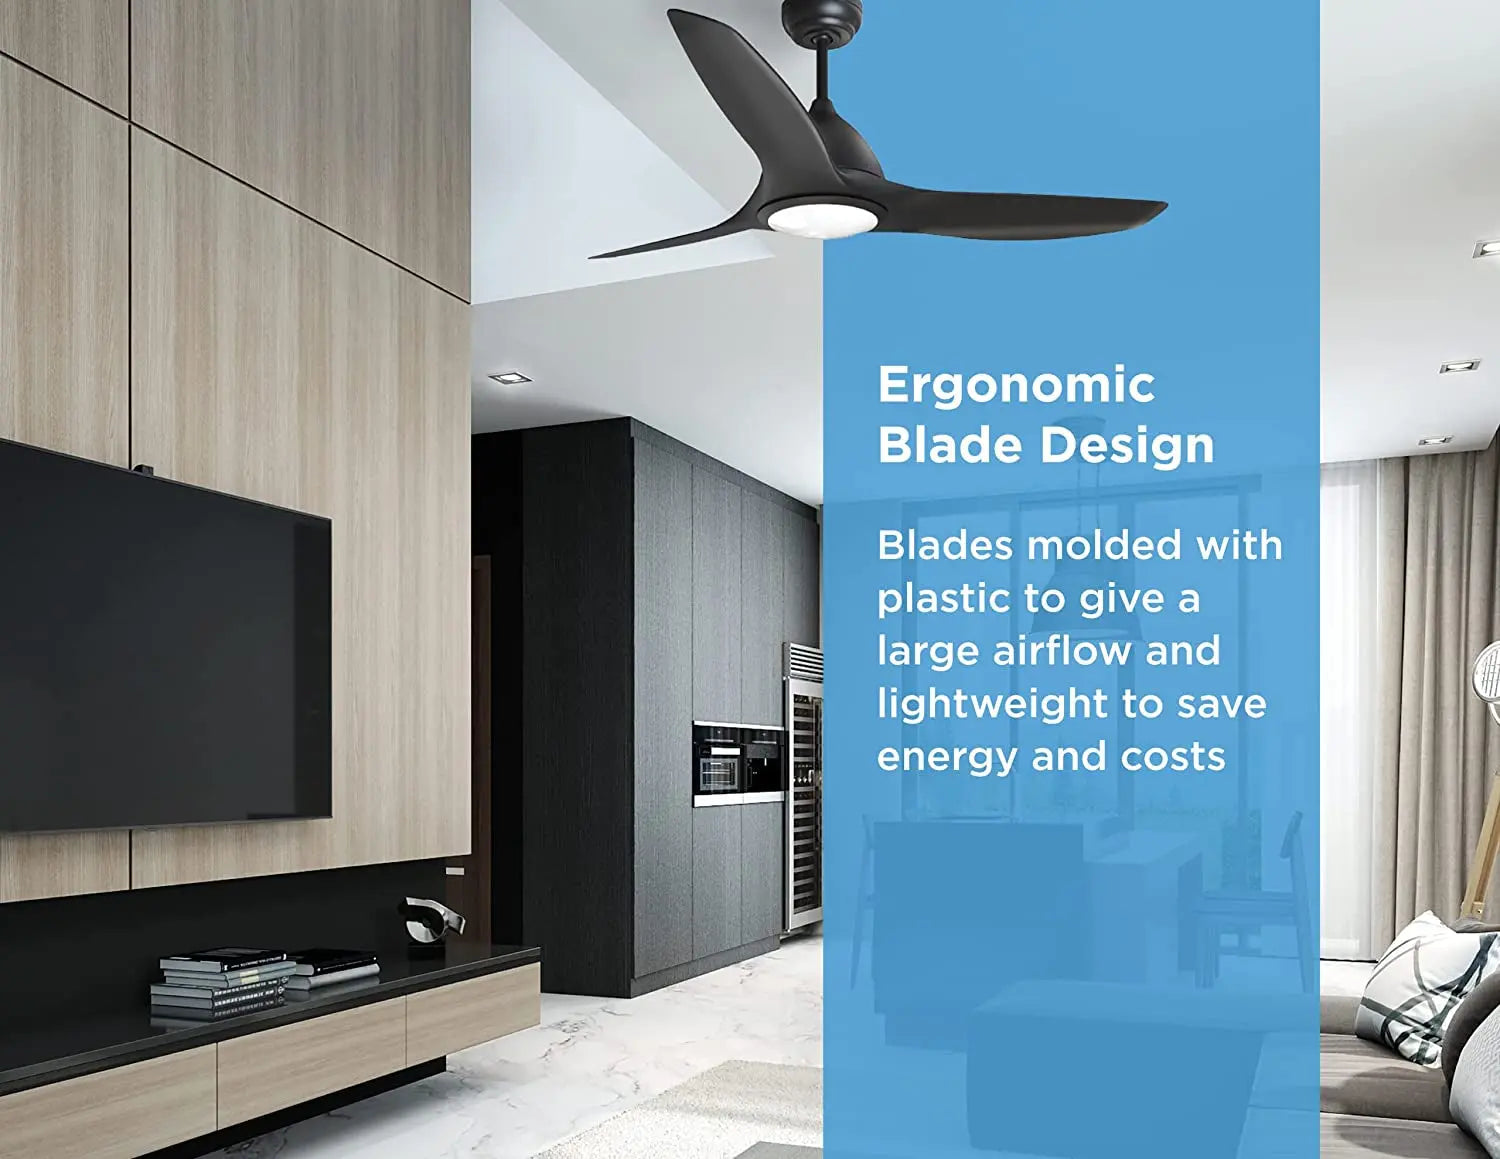 Smart Ceiling Fan 52" 3-Blade with LED Lights, High-Powered Quiet Fan with 3 Speeds and Reverse Function, Wifi Control Fan with 3 Color Temperatures, Reversible Fan Works with Alexa/Google